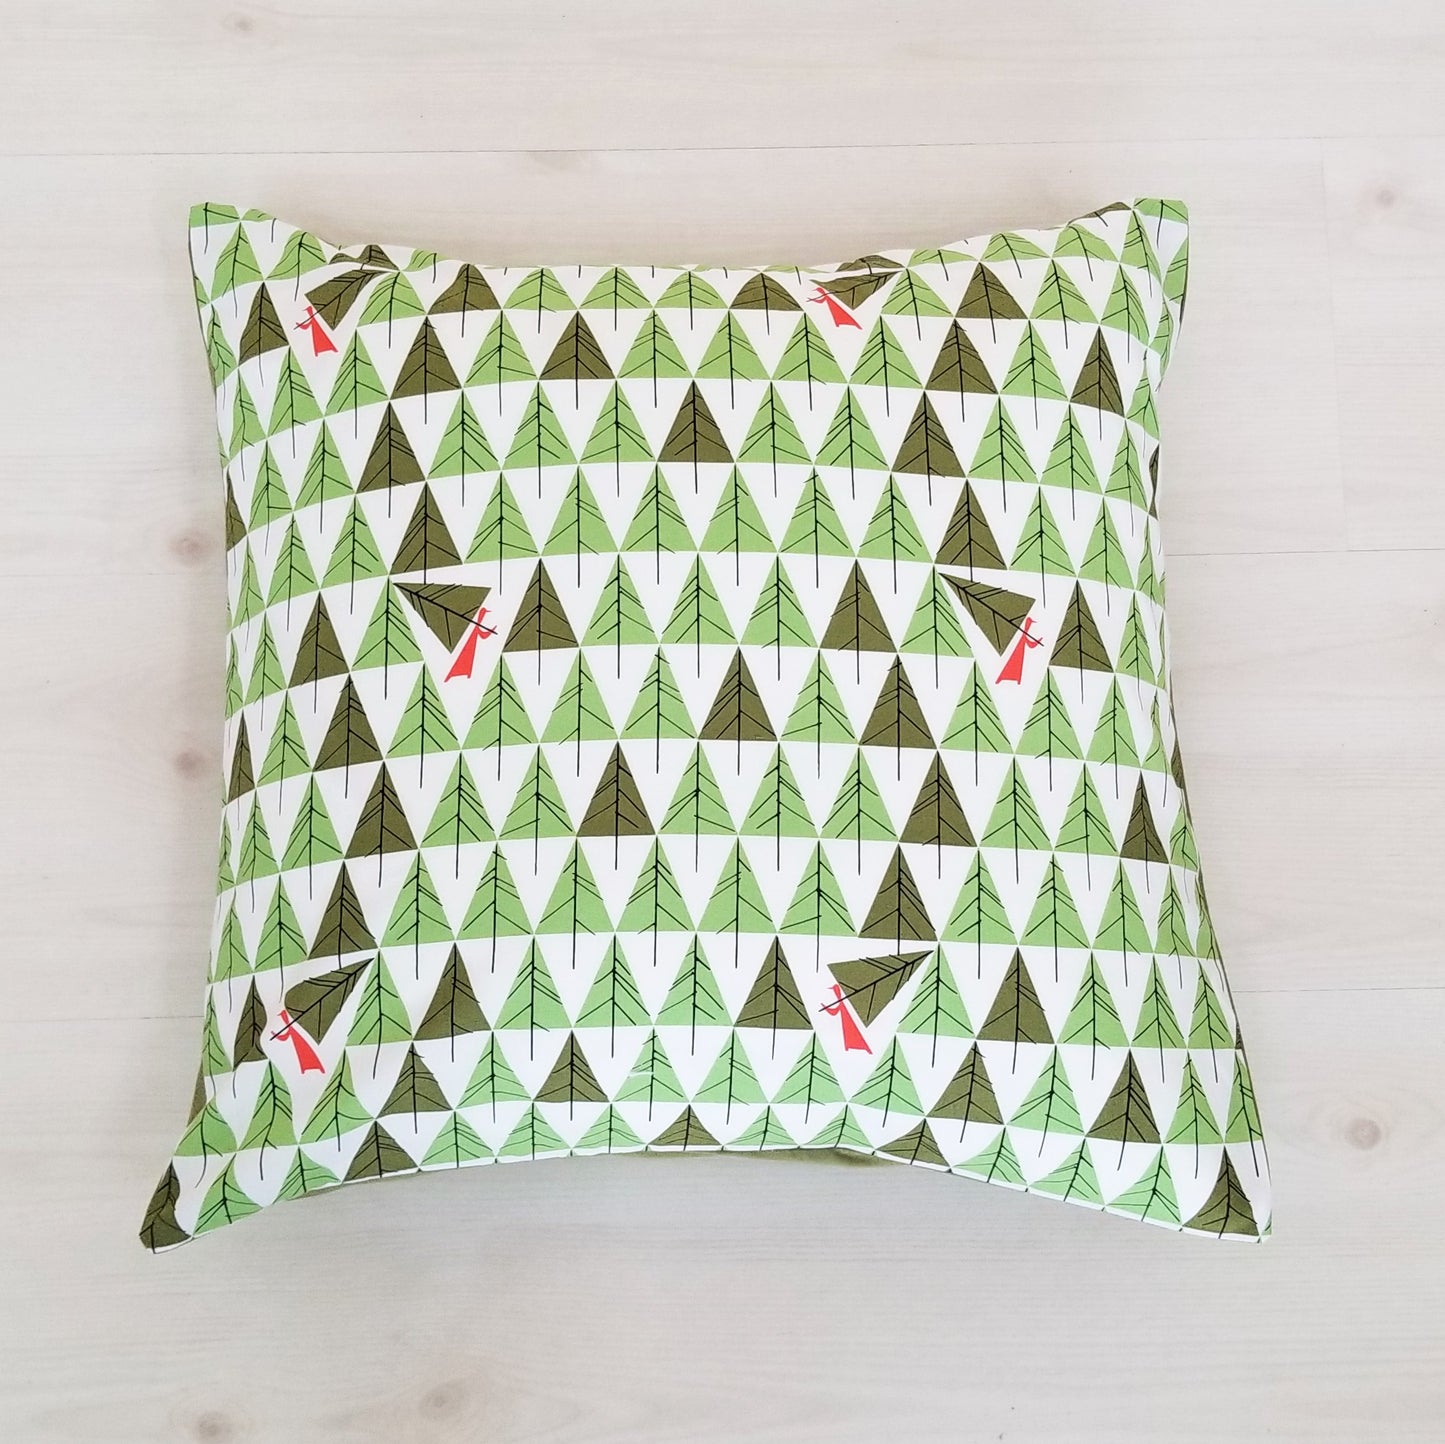 Organic Cotton Accent Pillow Covers in Charley Harper Prints